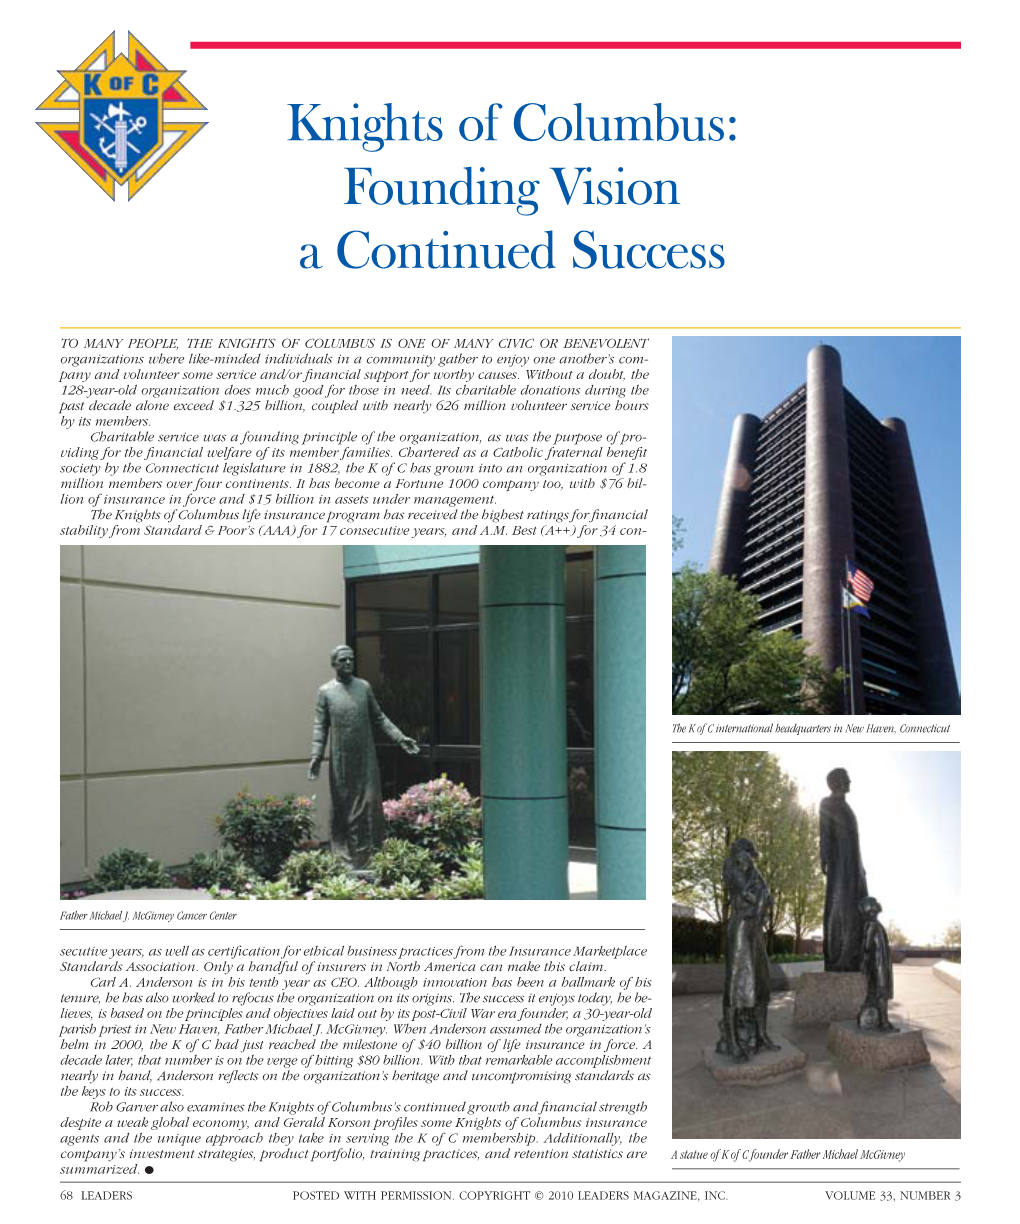 Knights of Columbus: Founding Vision a Continued Success